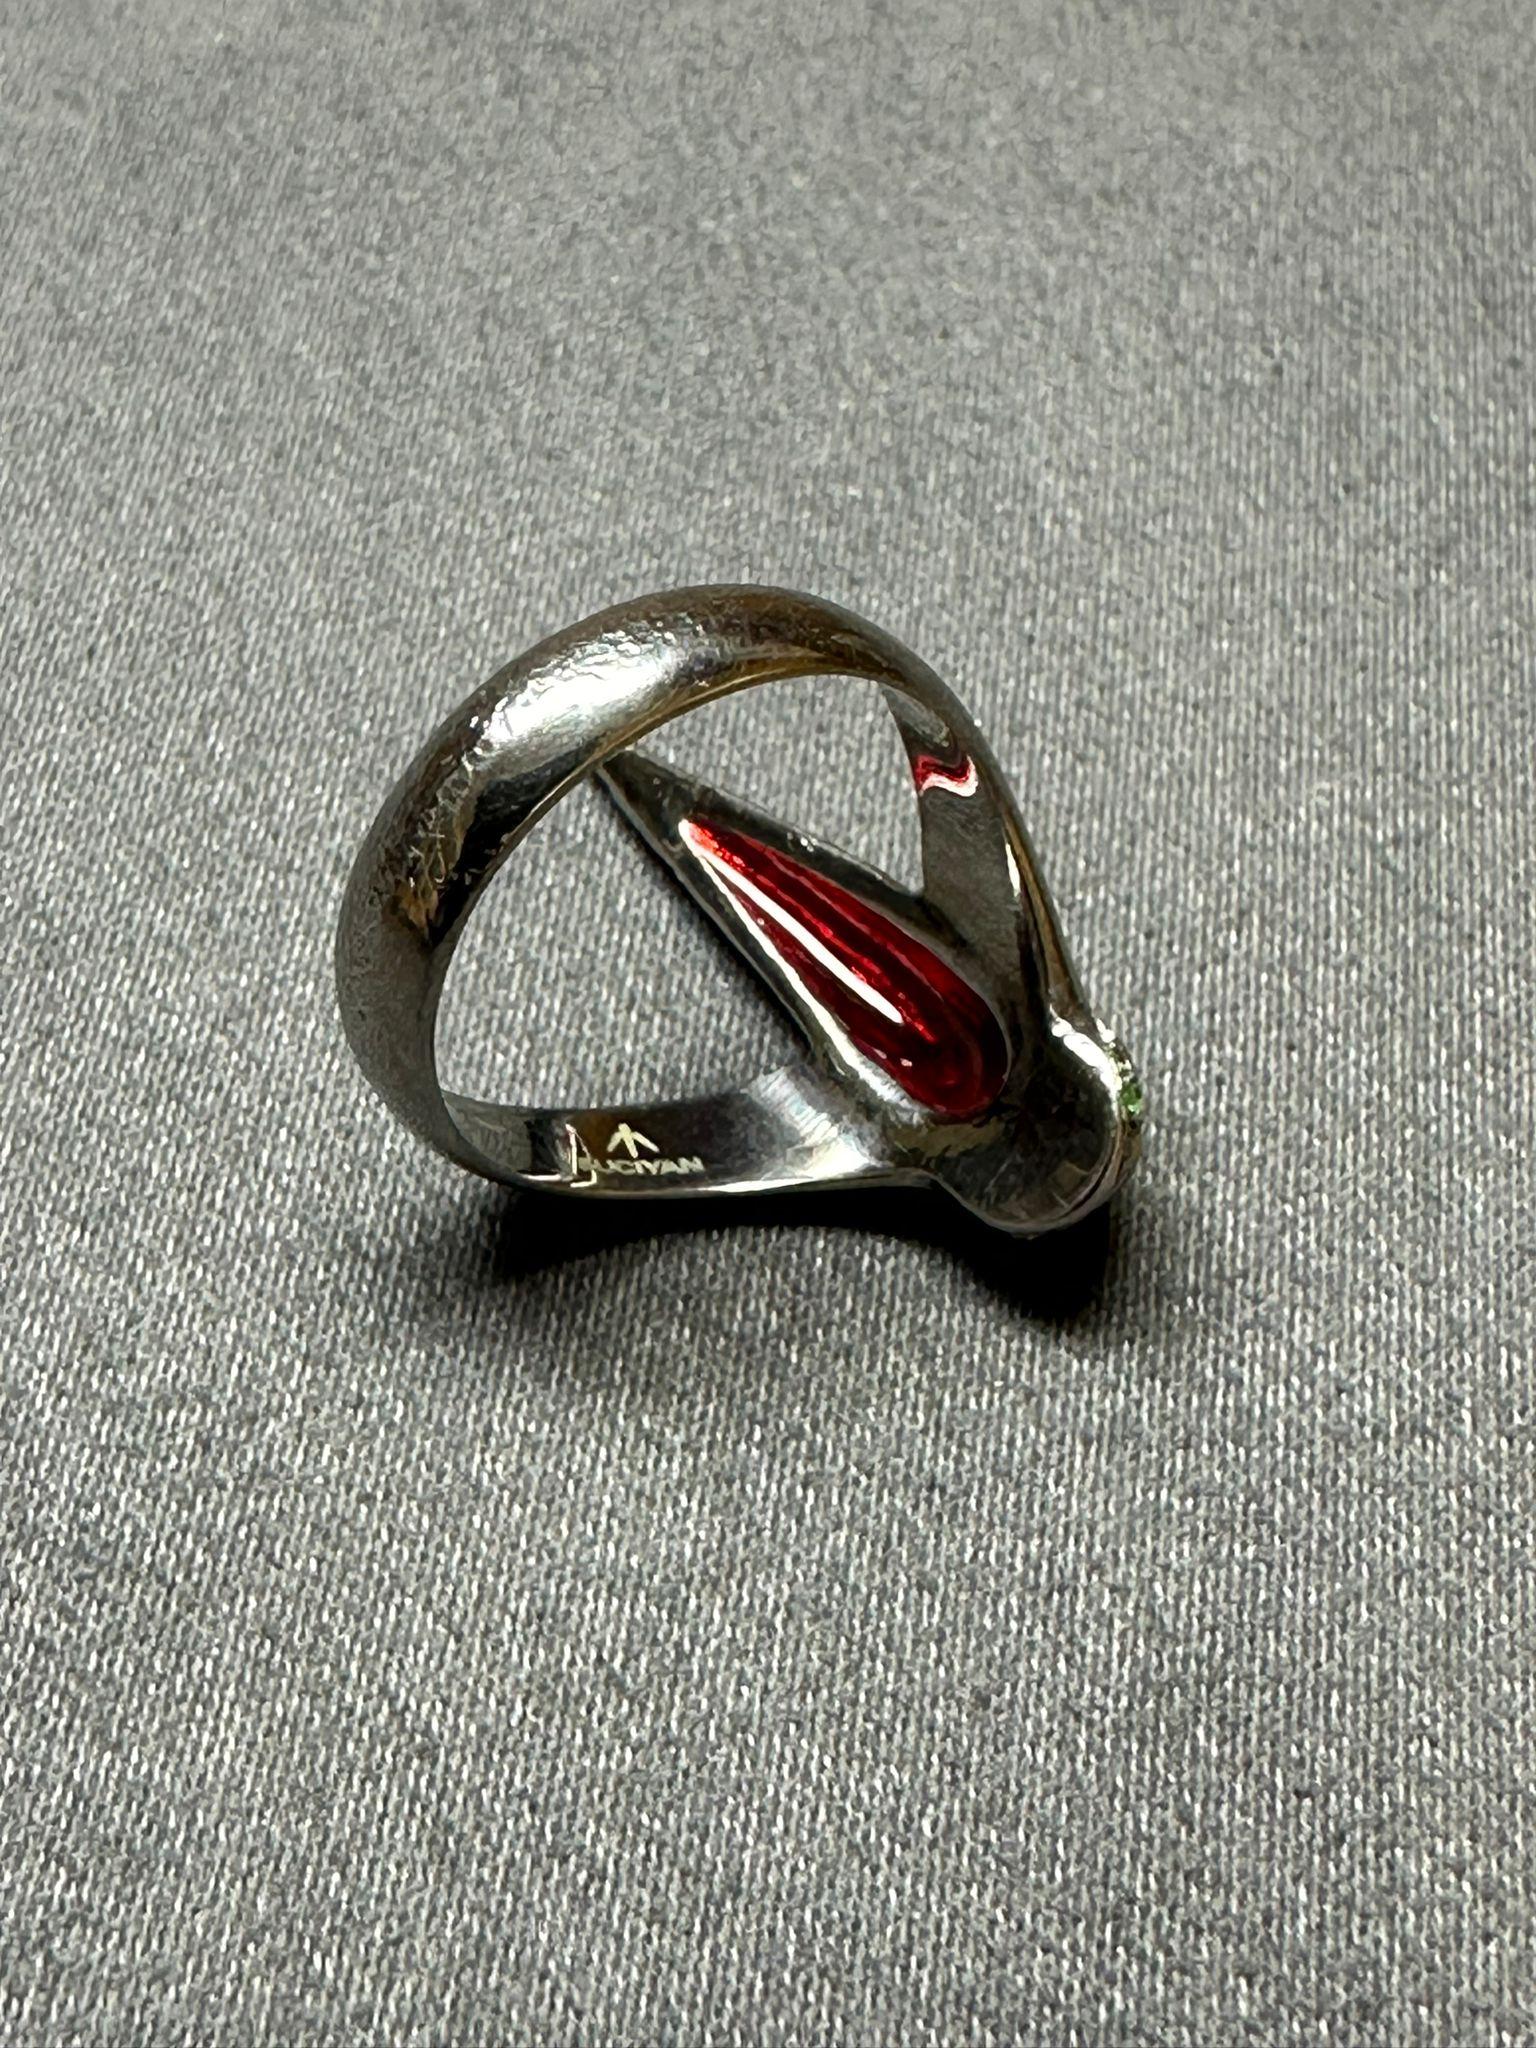 “Winged Drop ” Ring by Arman Suciyan at Second Petale Gallery.

 